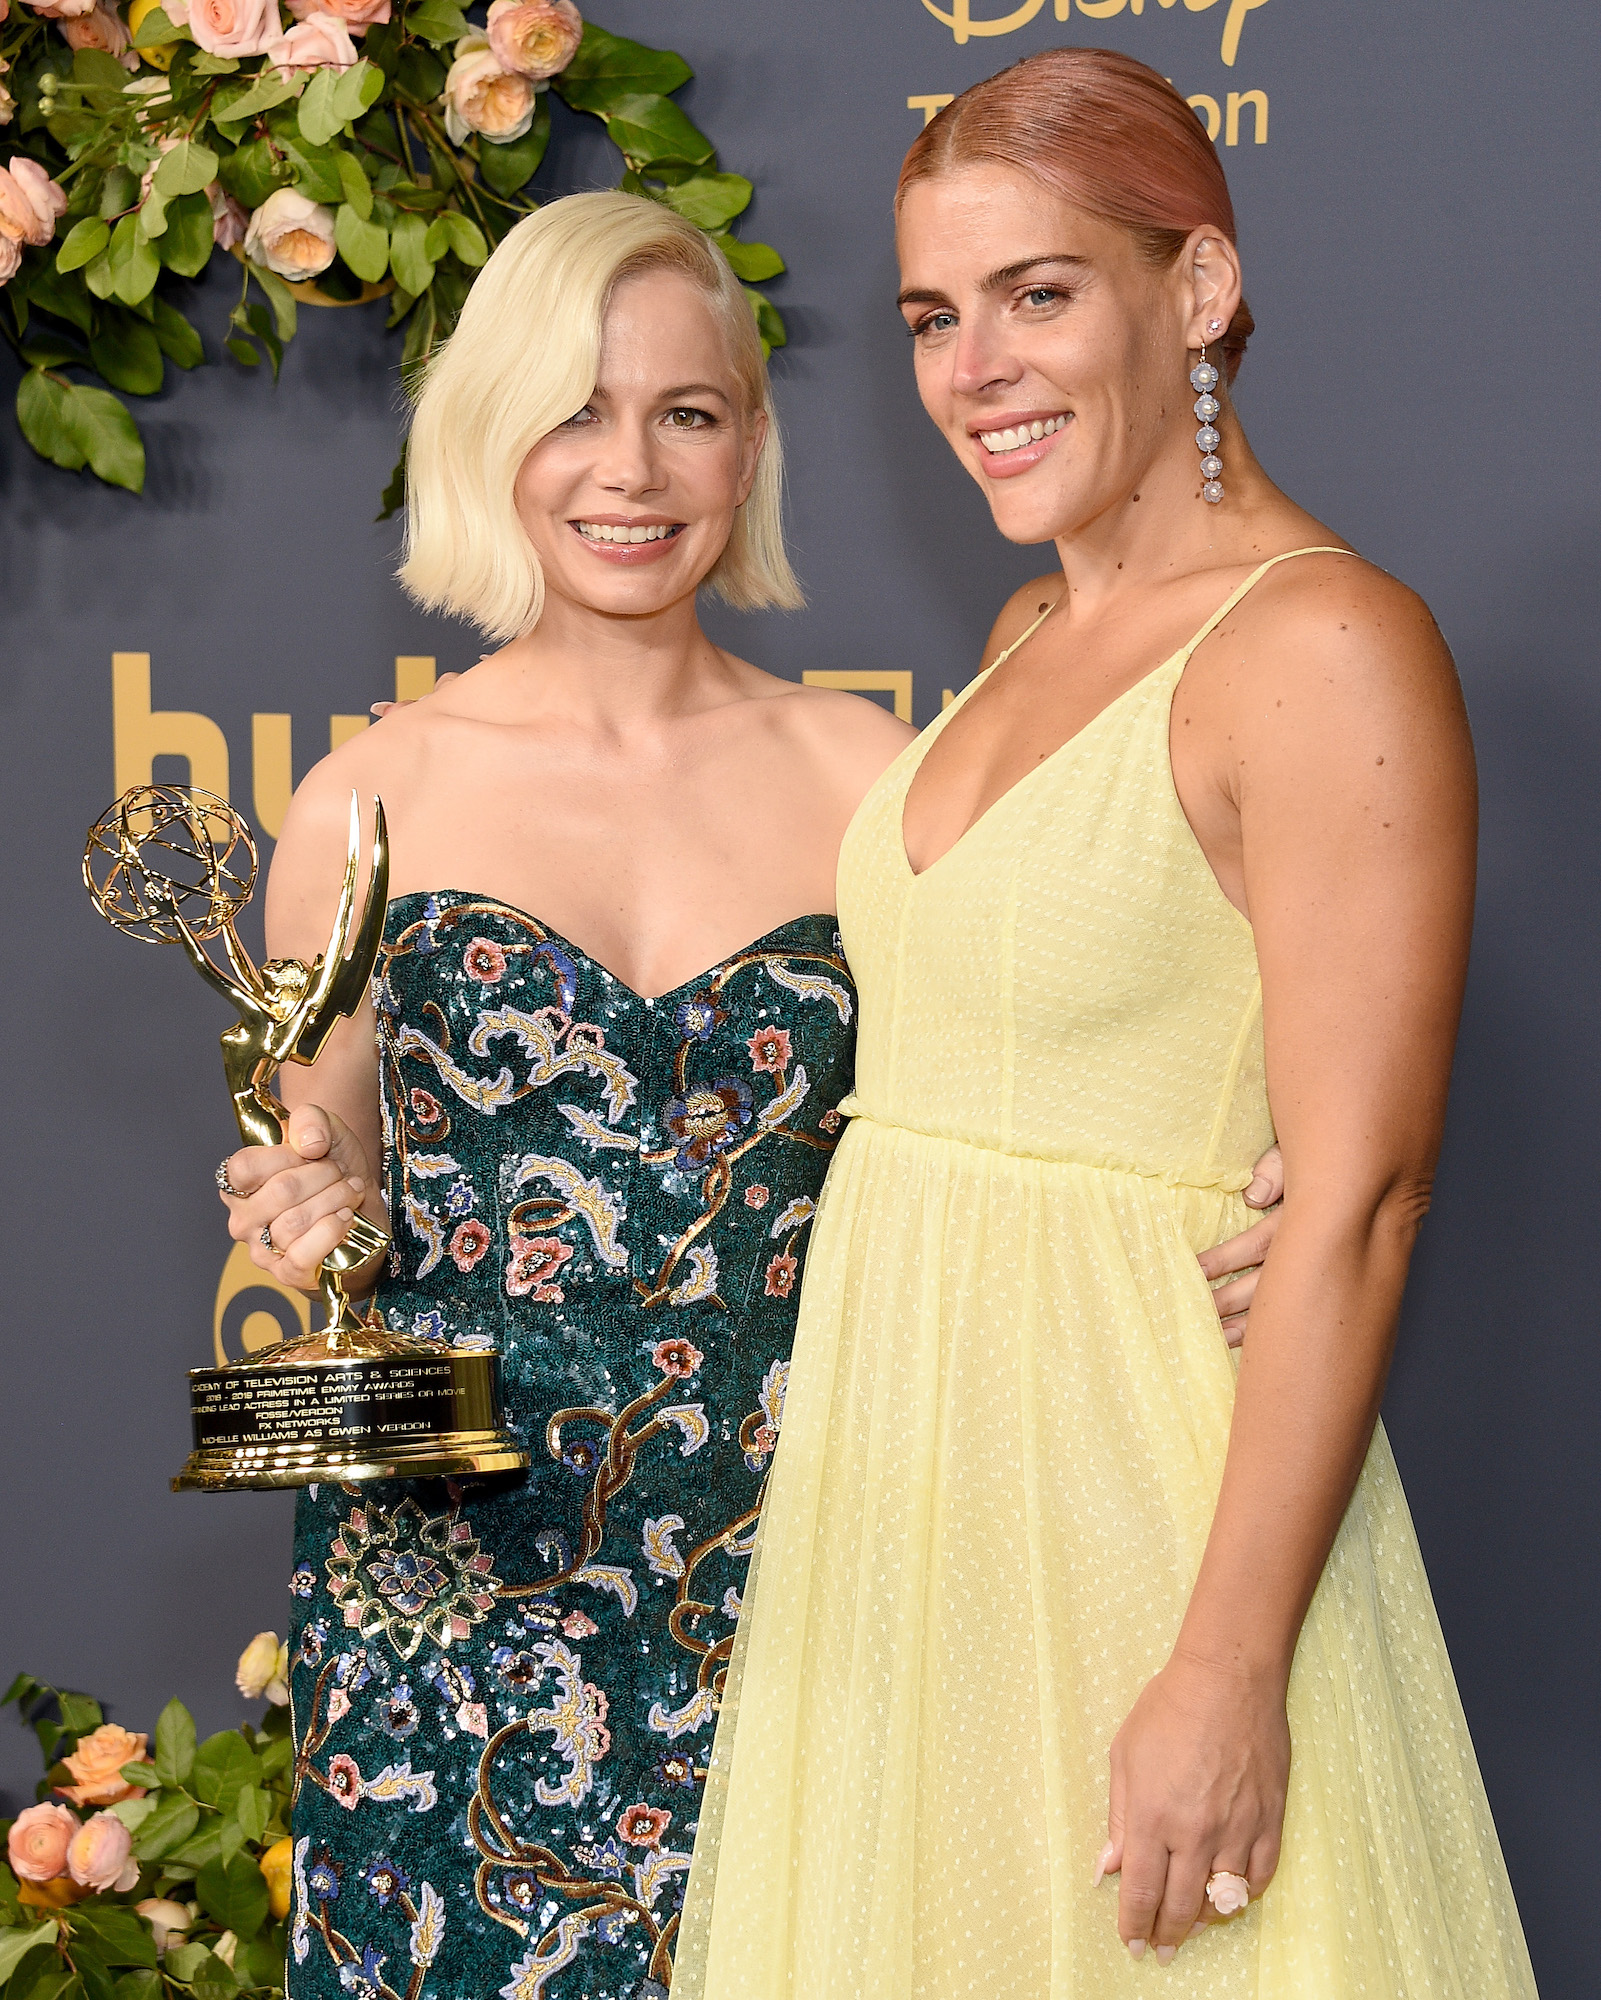 Busy Philipps and Michelle Williams ‘Lost It’ Over Britney Spears Audiobook